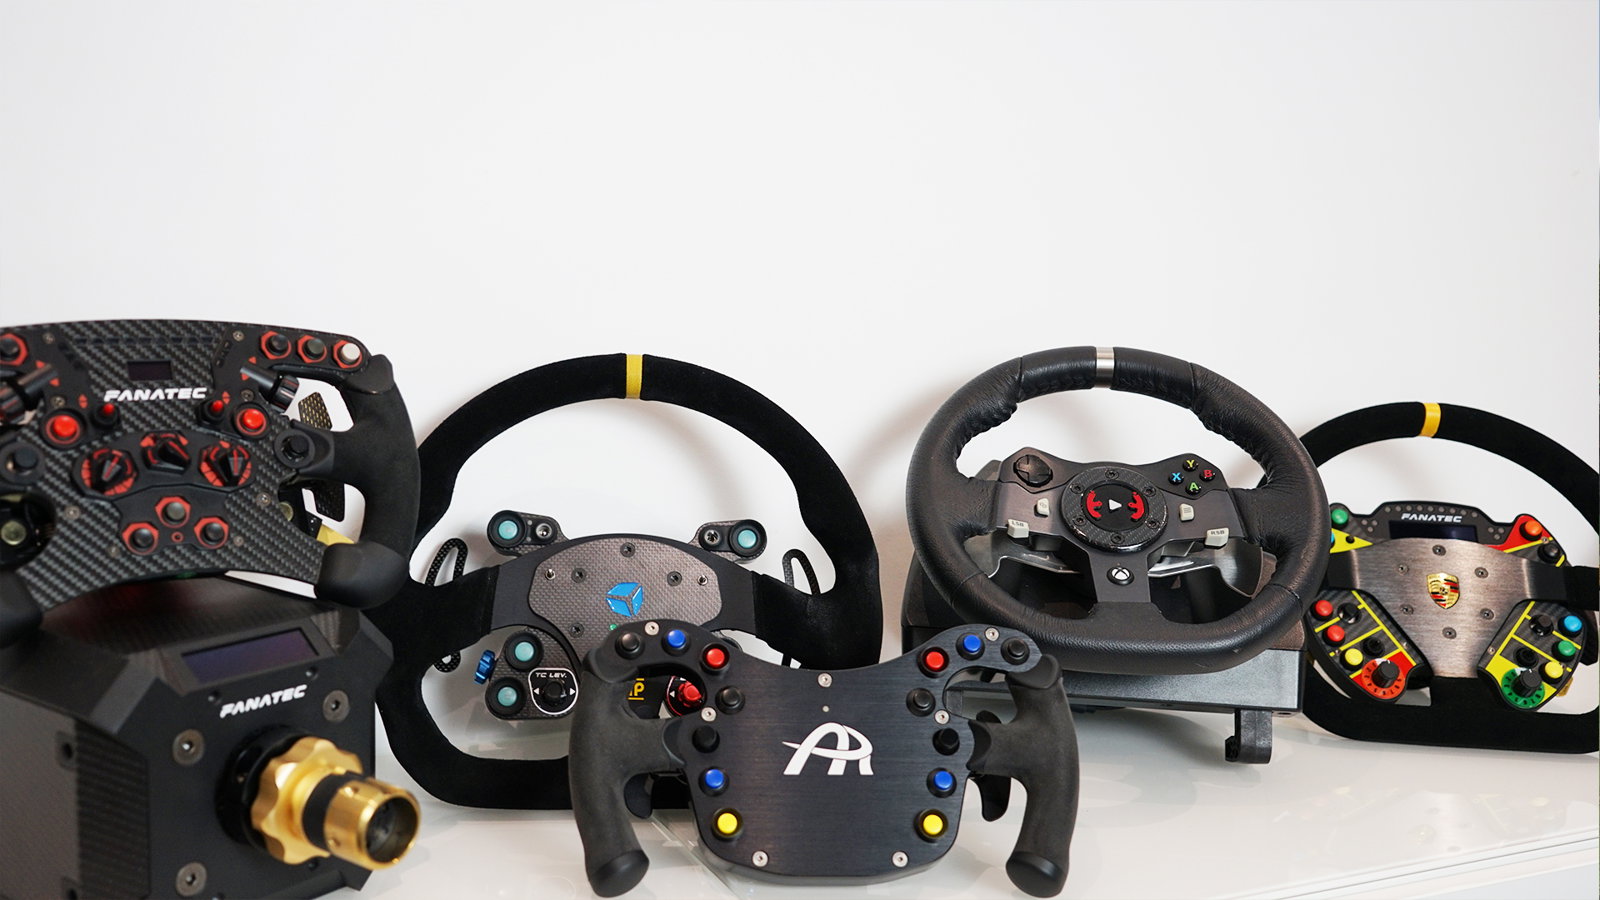 The Best Sim Racing Shifters - Buyer's Guide